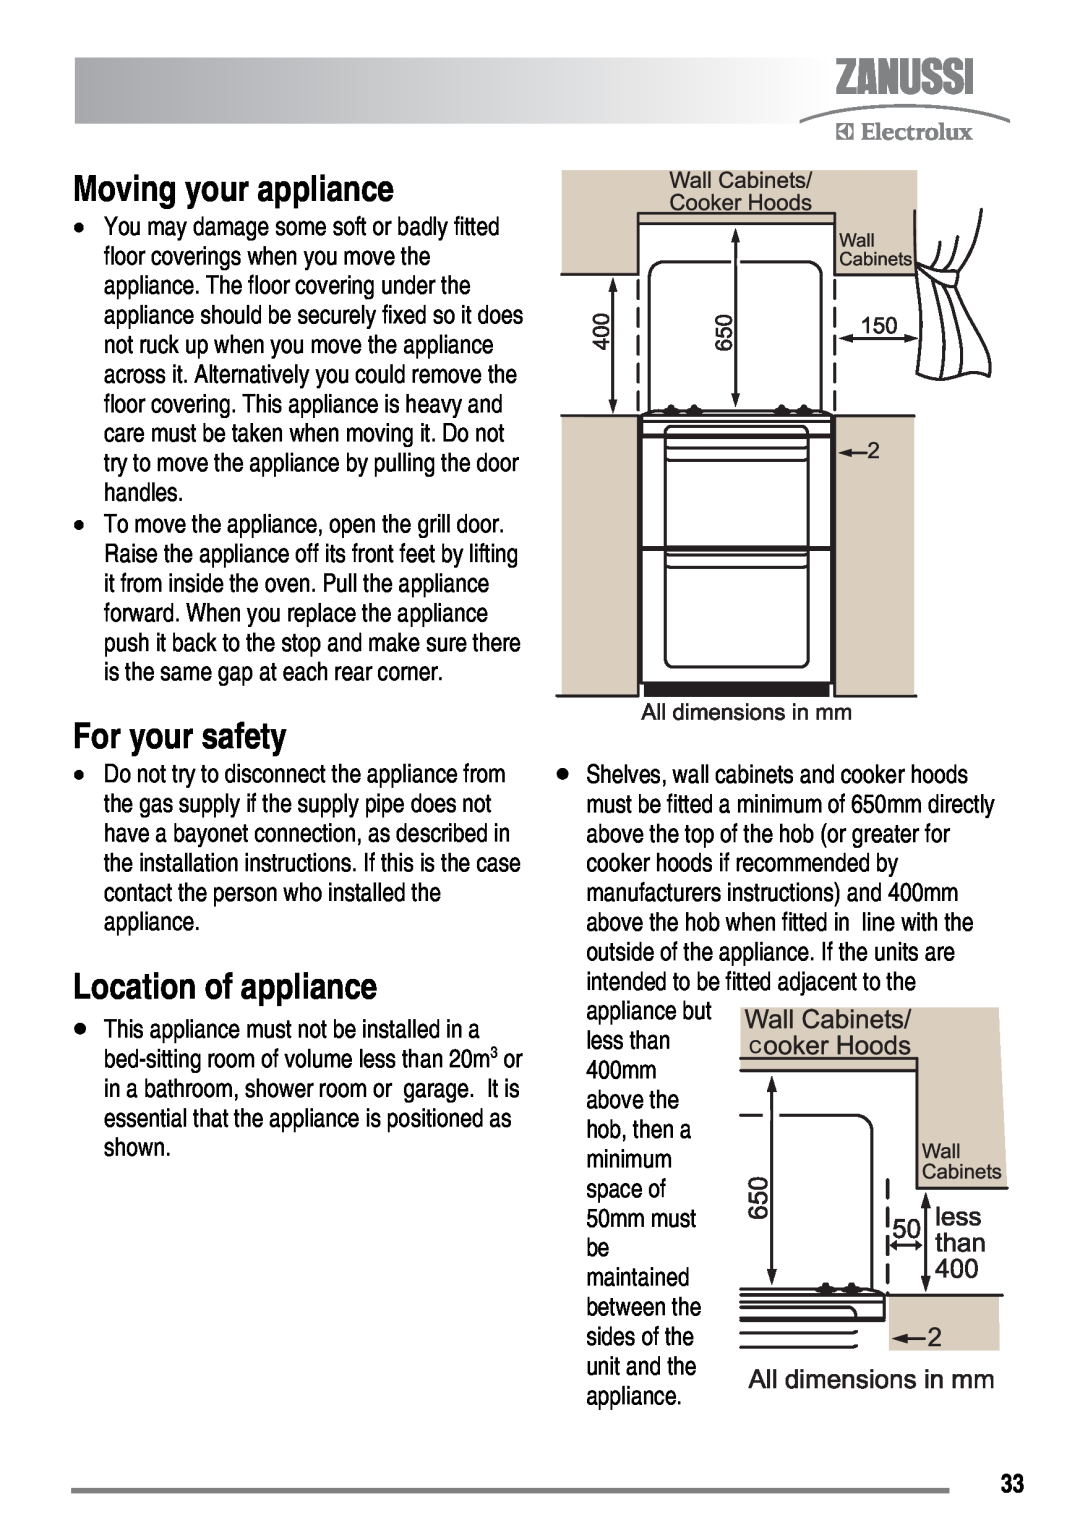 Zanussi ZKG6020 user manual Moving your appliance, For your safety, Location of appliance, above the 